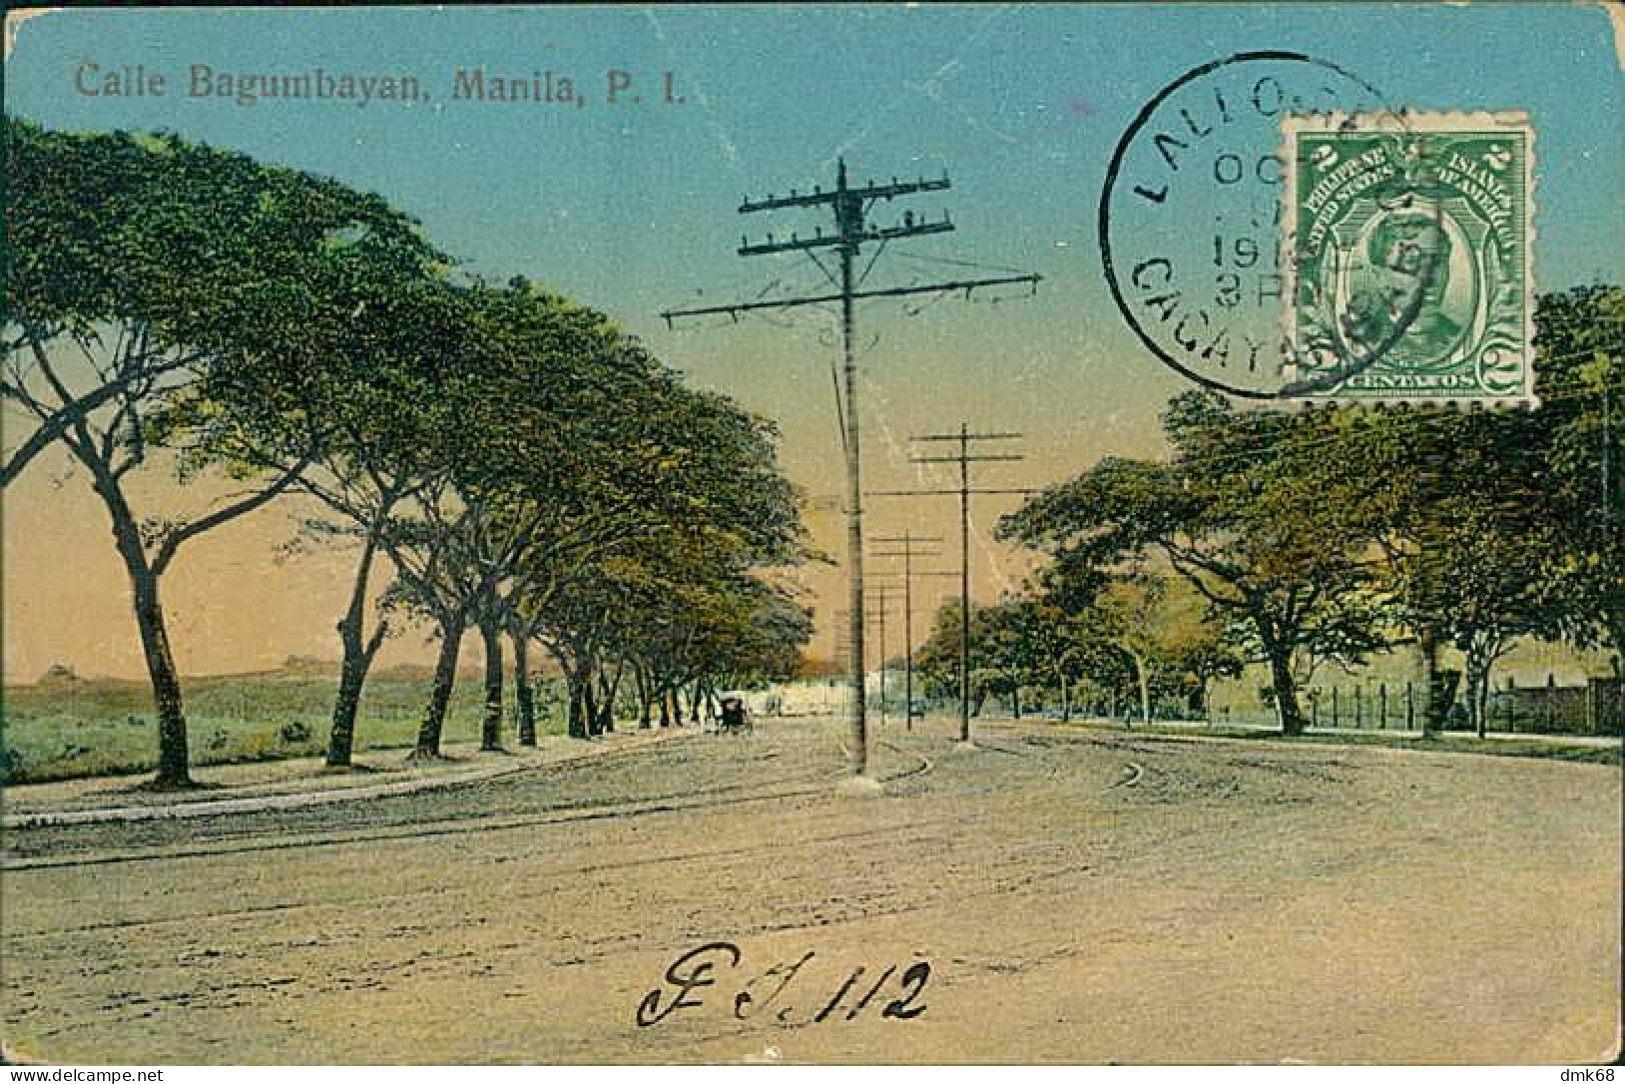 PHILIPPINES - MANILA - CALLE BAGUMBAYAN - PUB. BY CAMERA SUPPLY COMPANY - MAILED 1918 / STAMP (18345) - Filippine